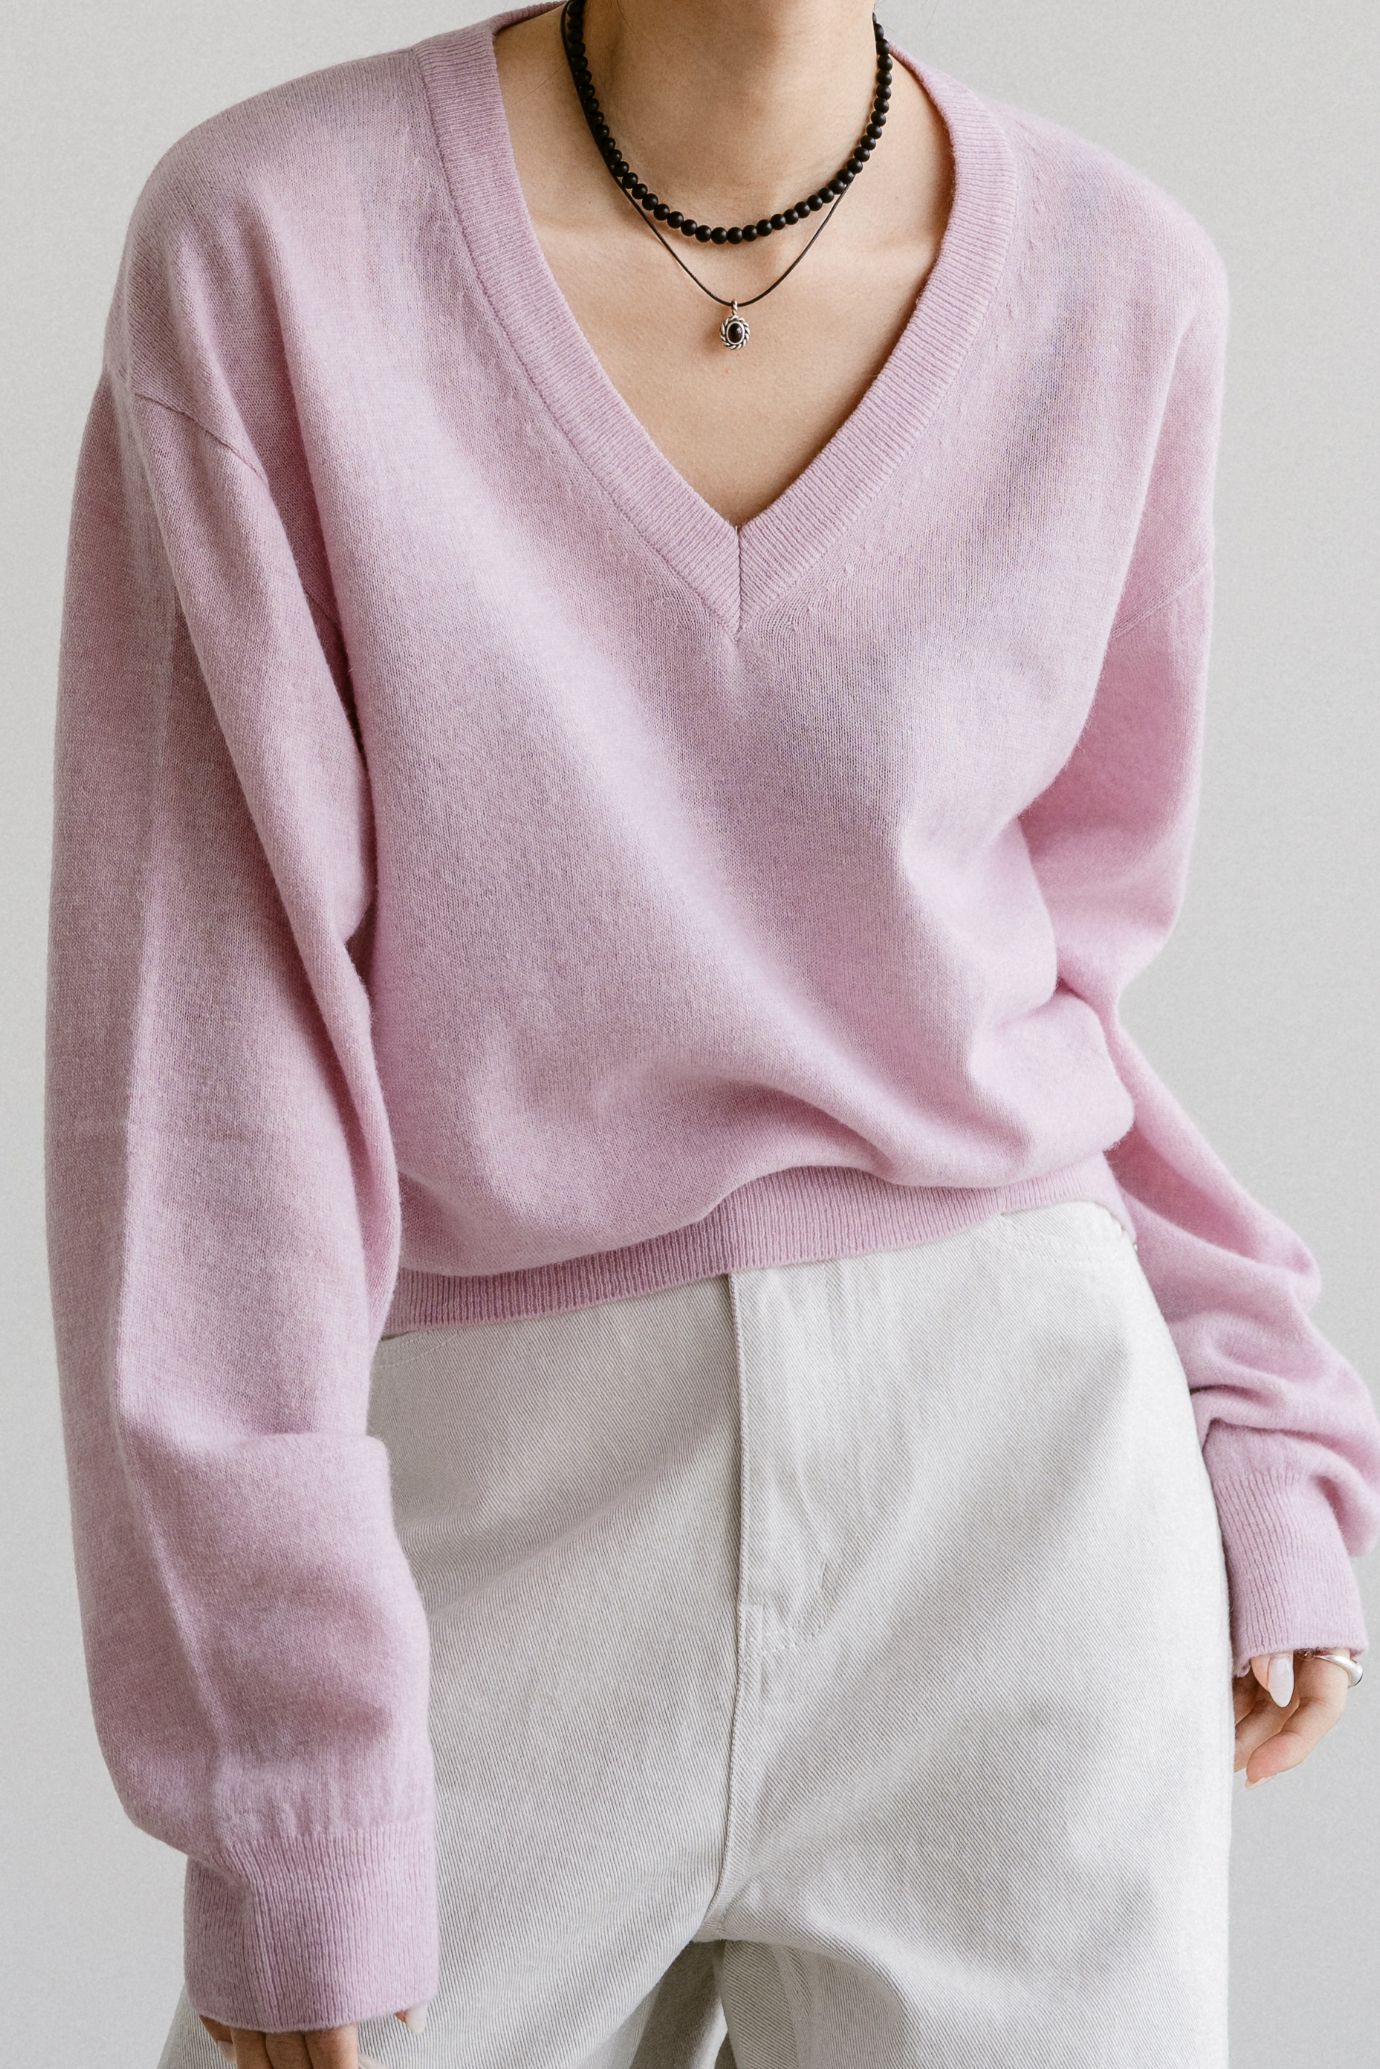 19578_ Wool V-Neck Sweater [ow]